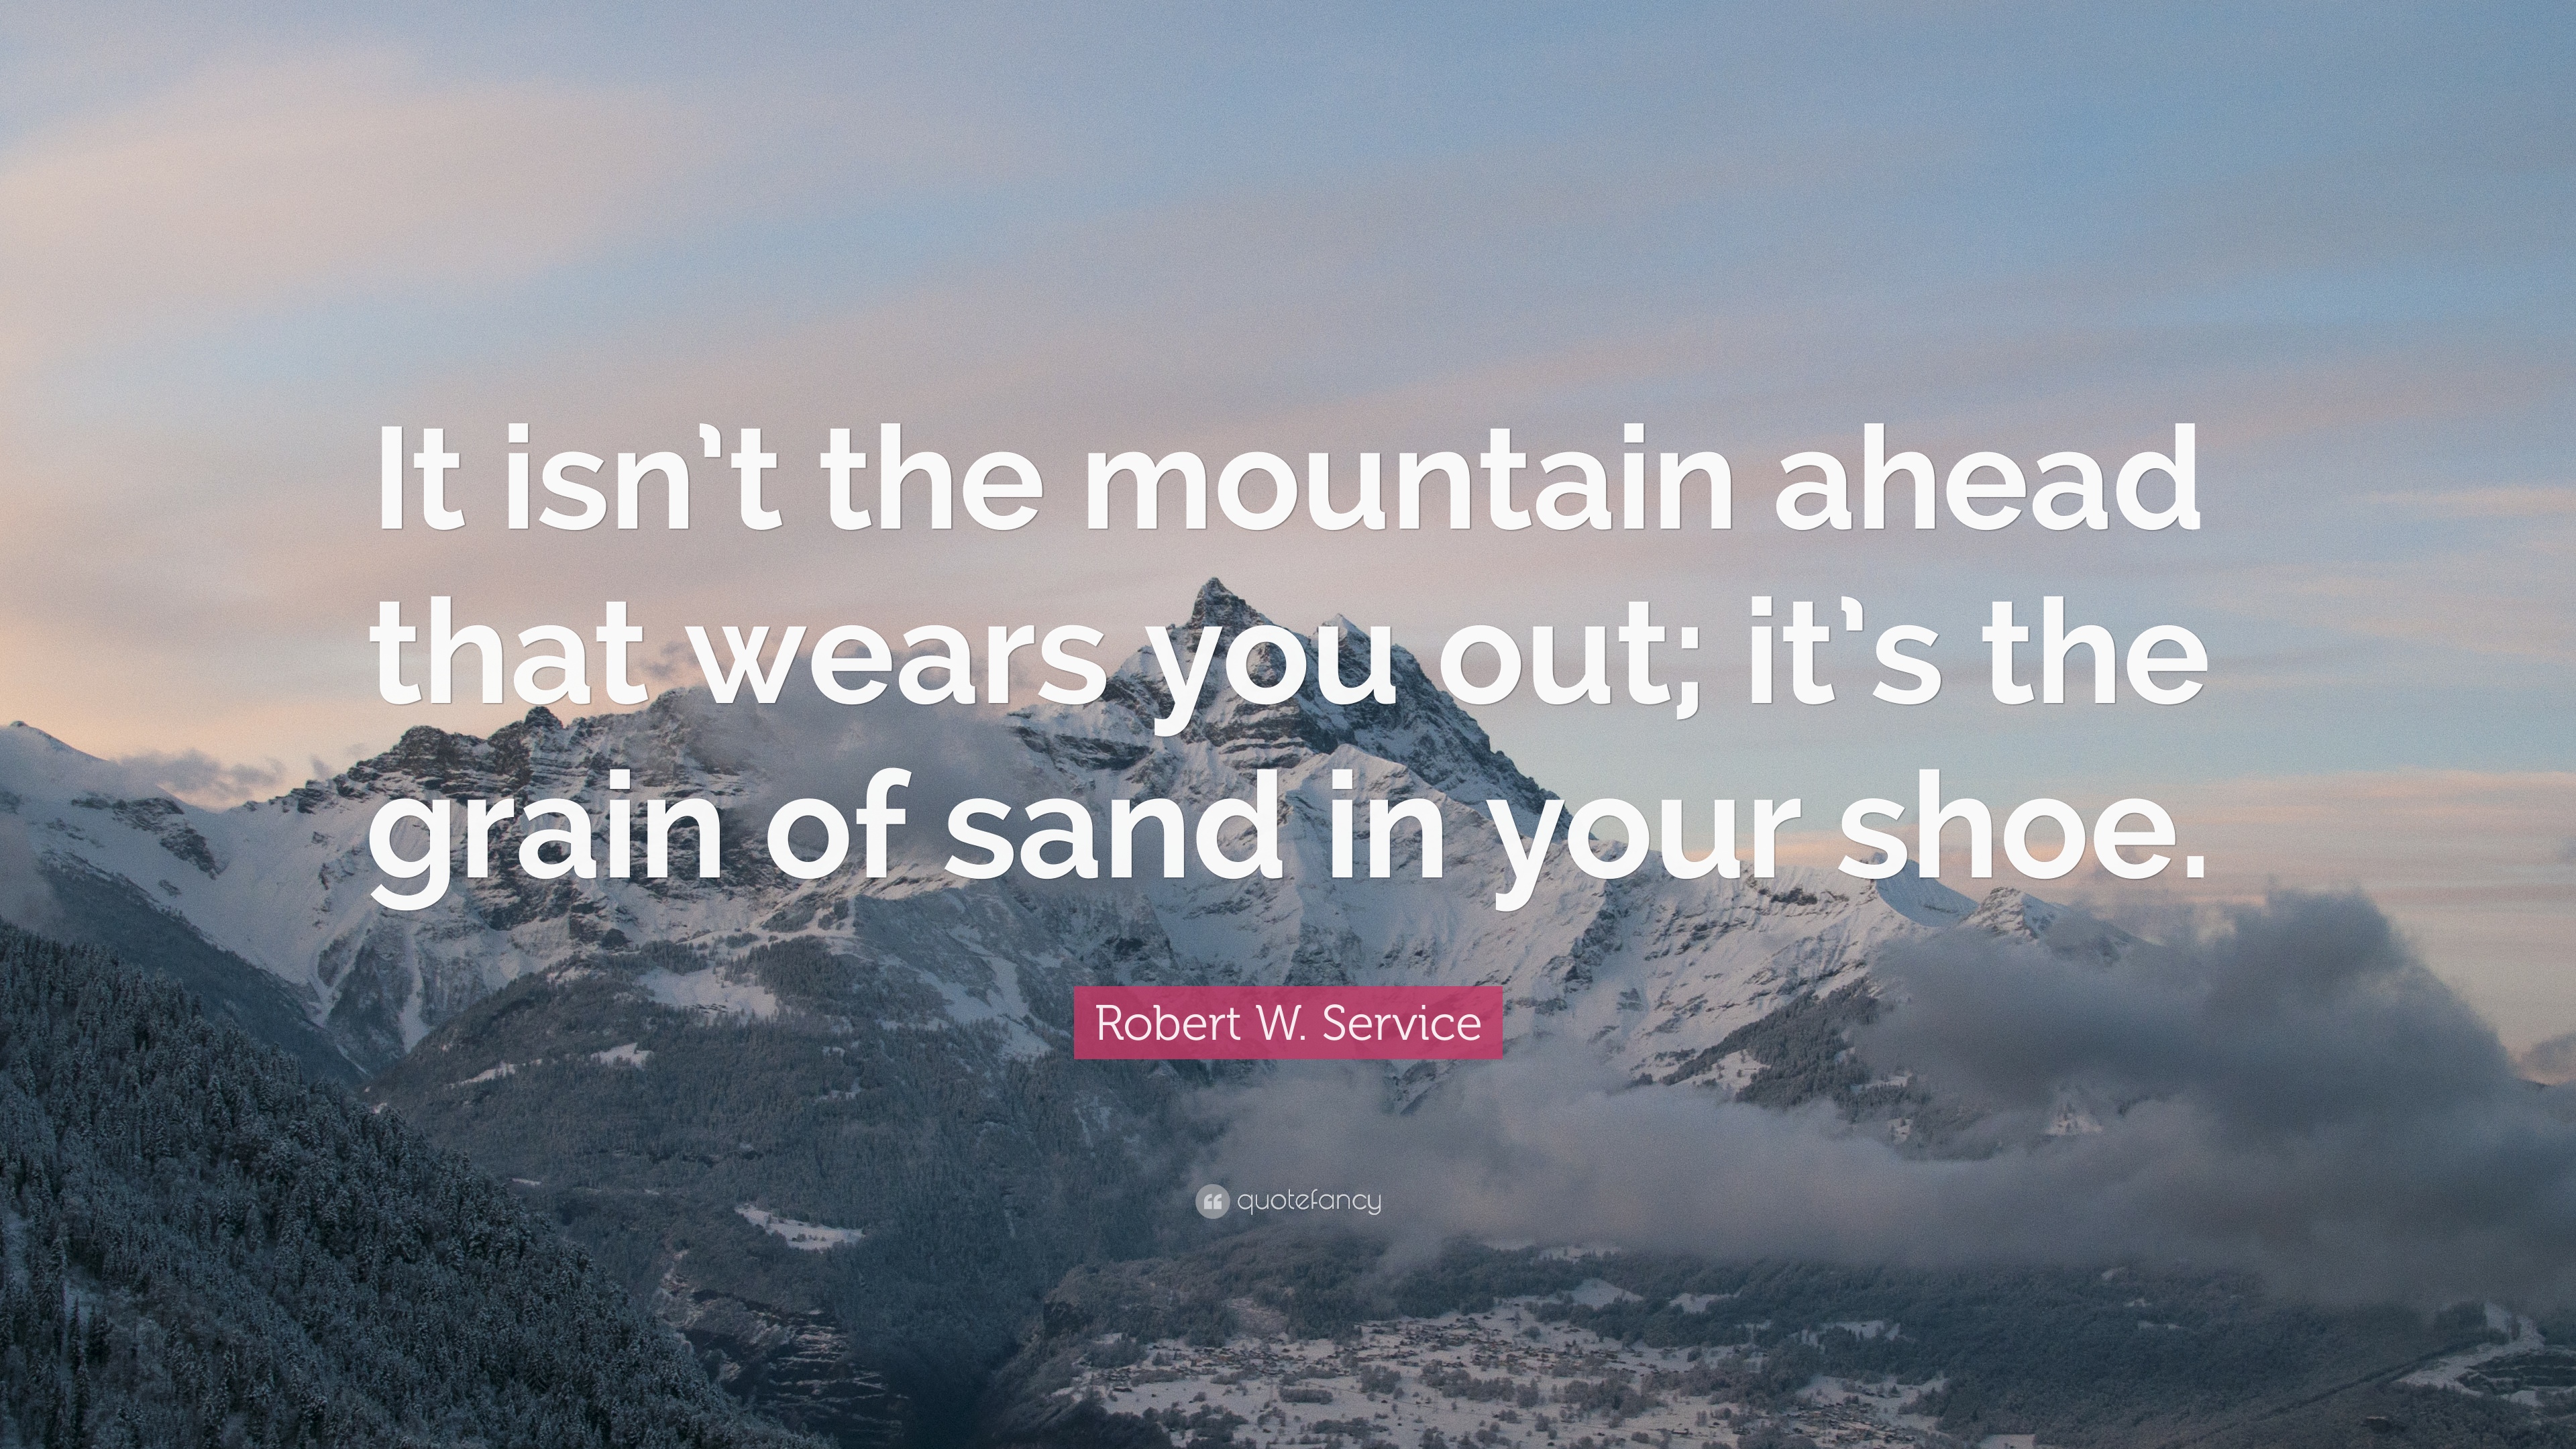 Robert W. Service Quote: “It isn't the mountain ahead that wears you ...